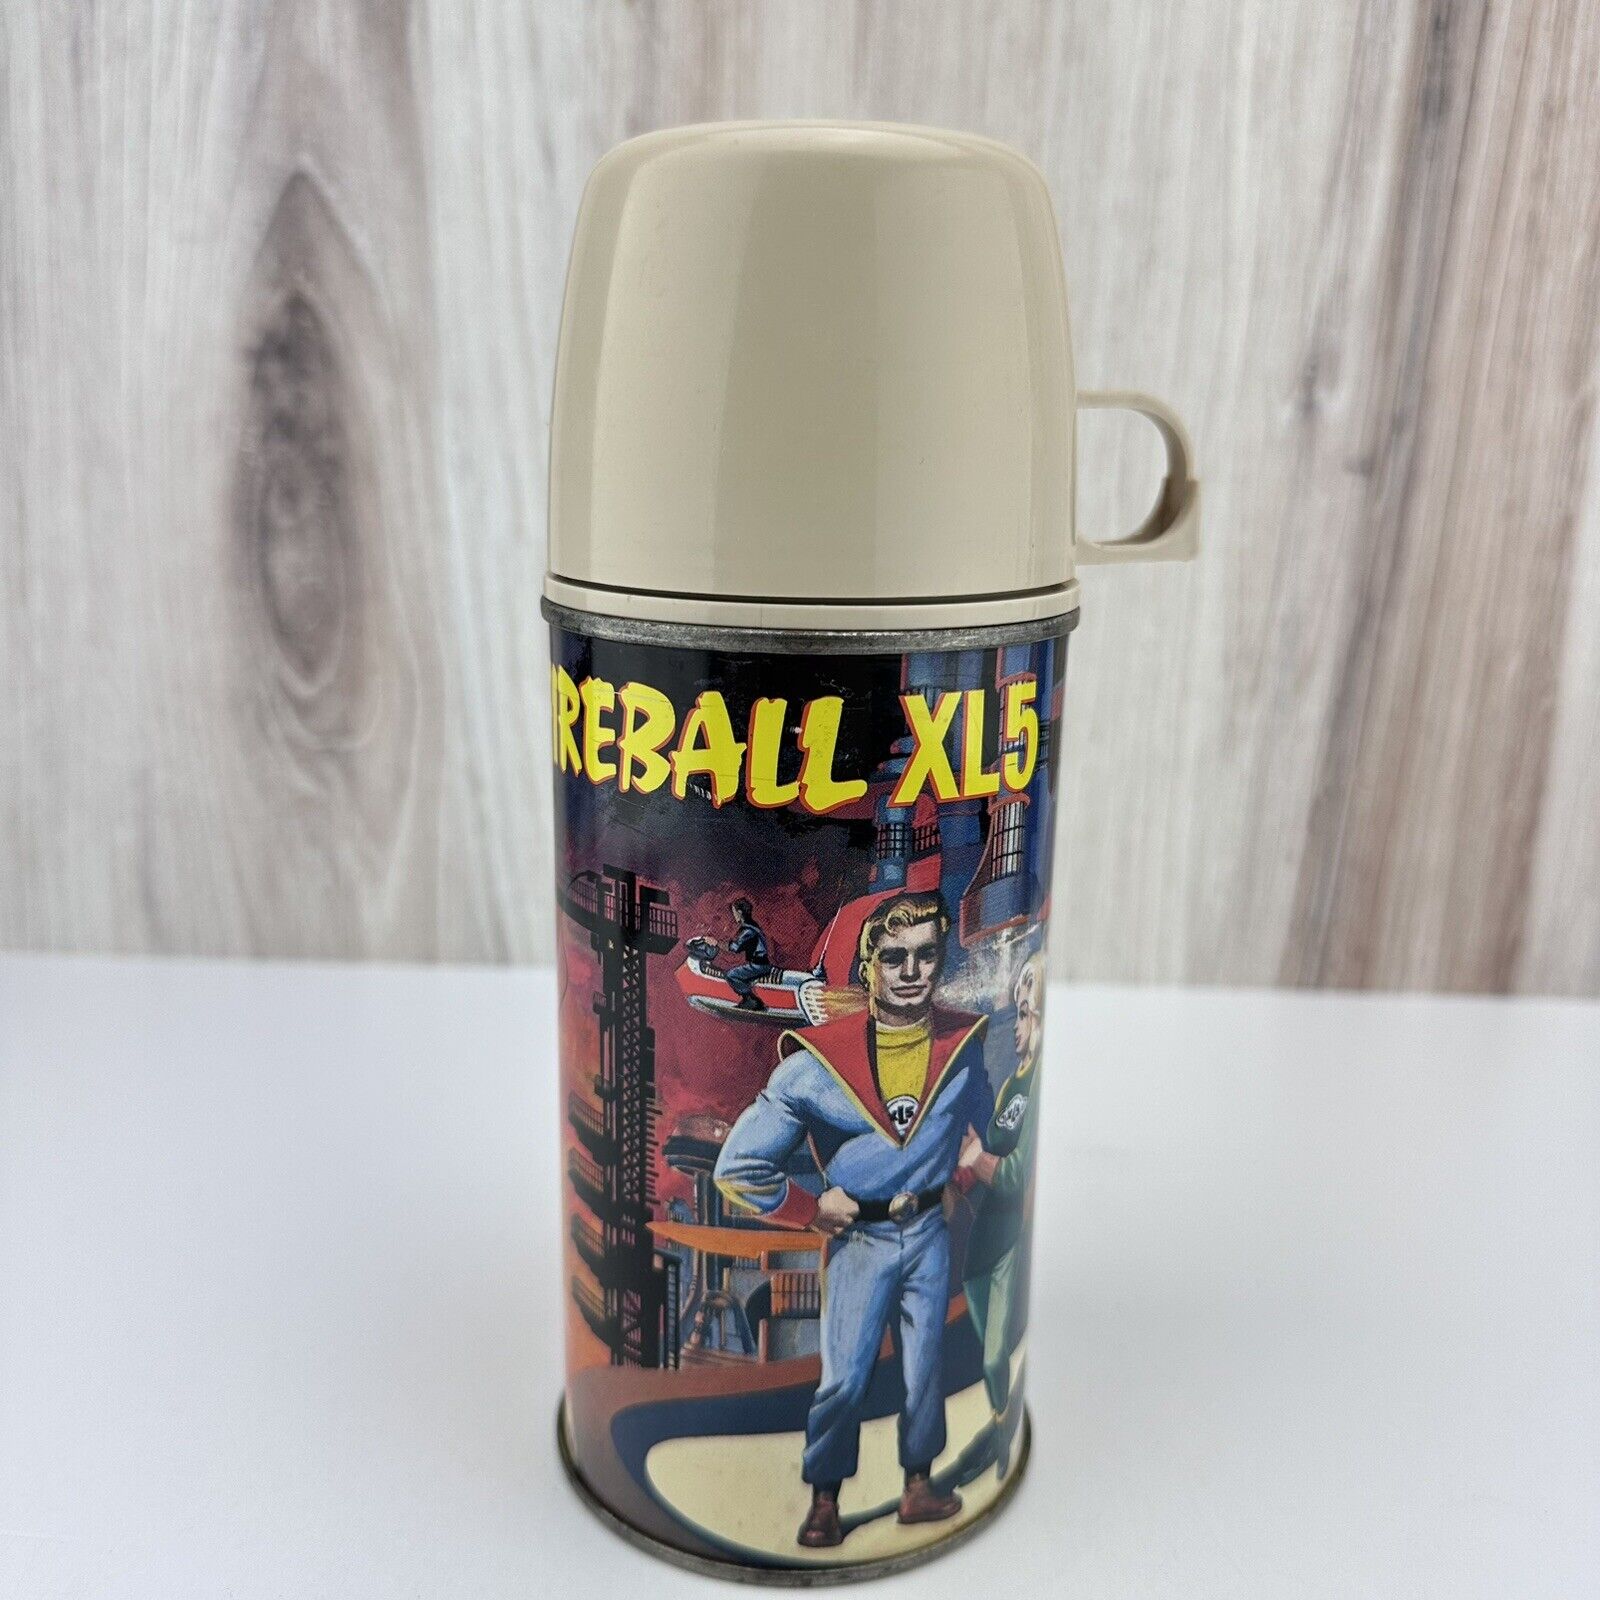 Vintage Fireball XL5 Metal Thermos w/ Plastic Cup - 1964 Thunderbirds Space 2072